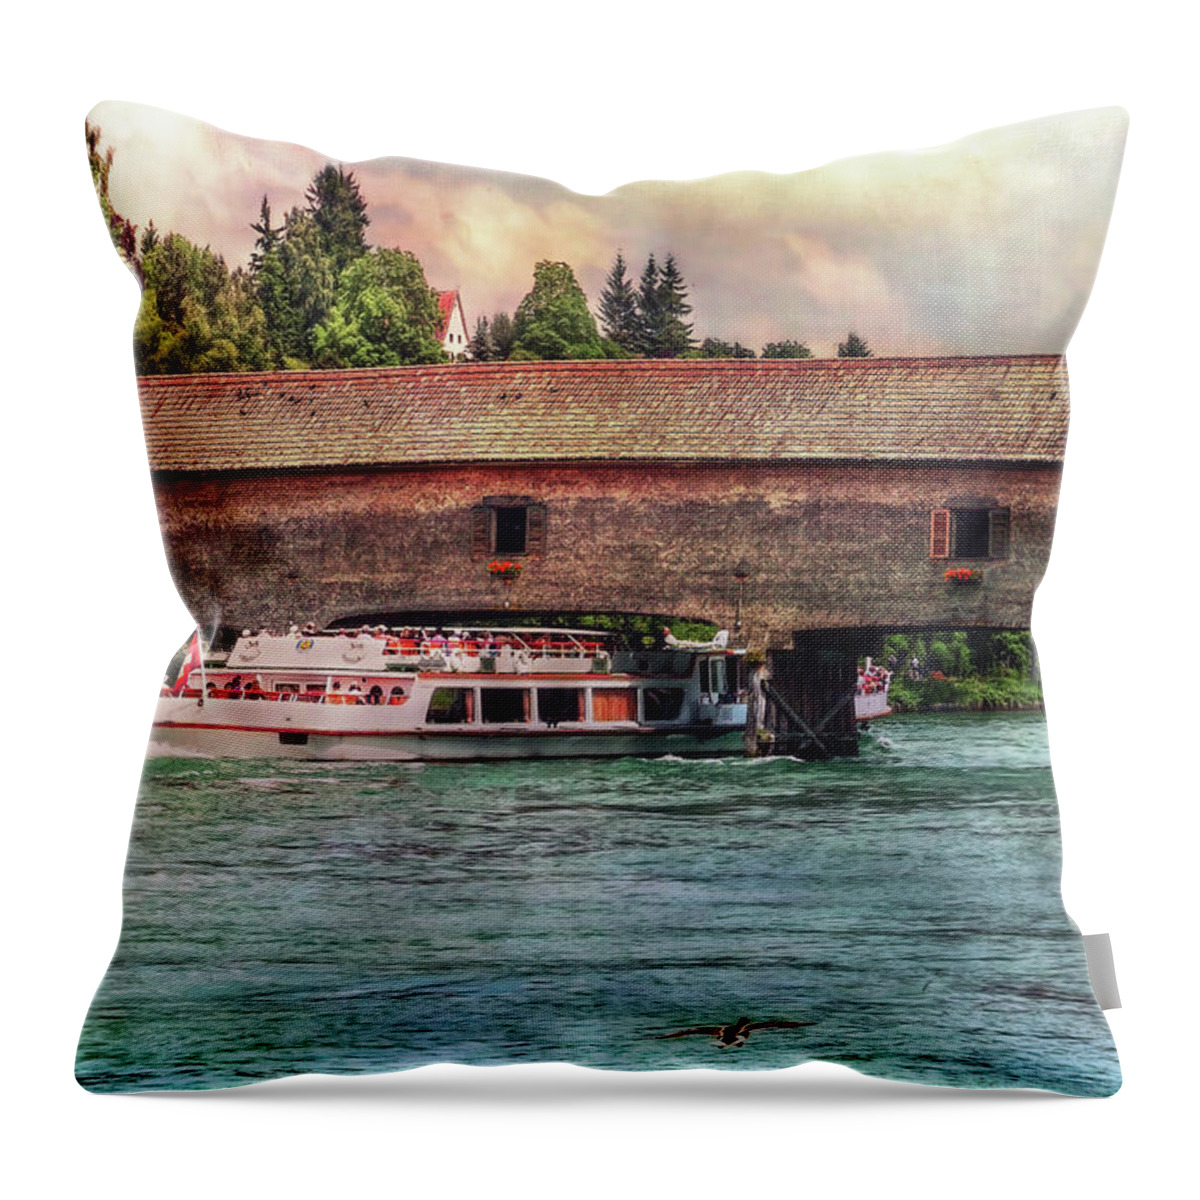 Switzerland Throw Pillow featuring the photograph Rhine Shipping by Hanny Heim